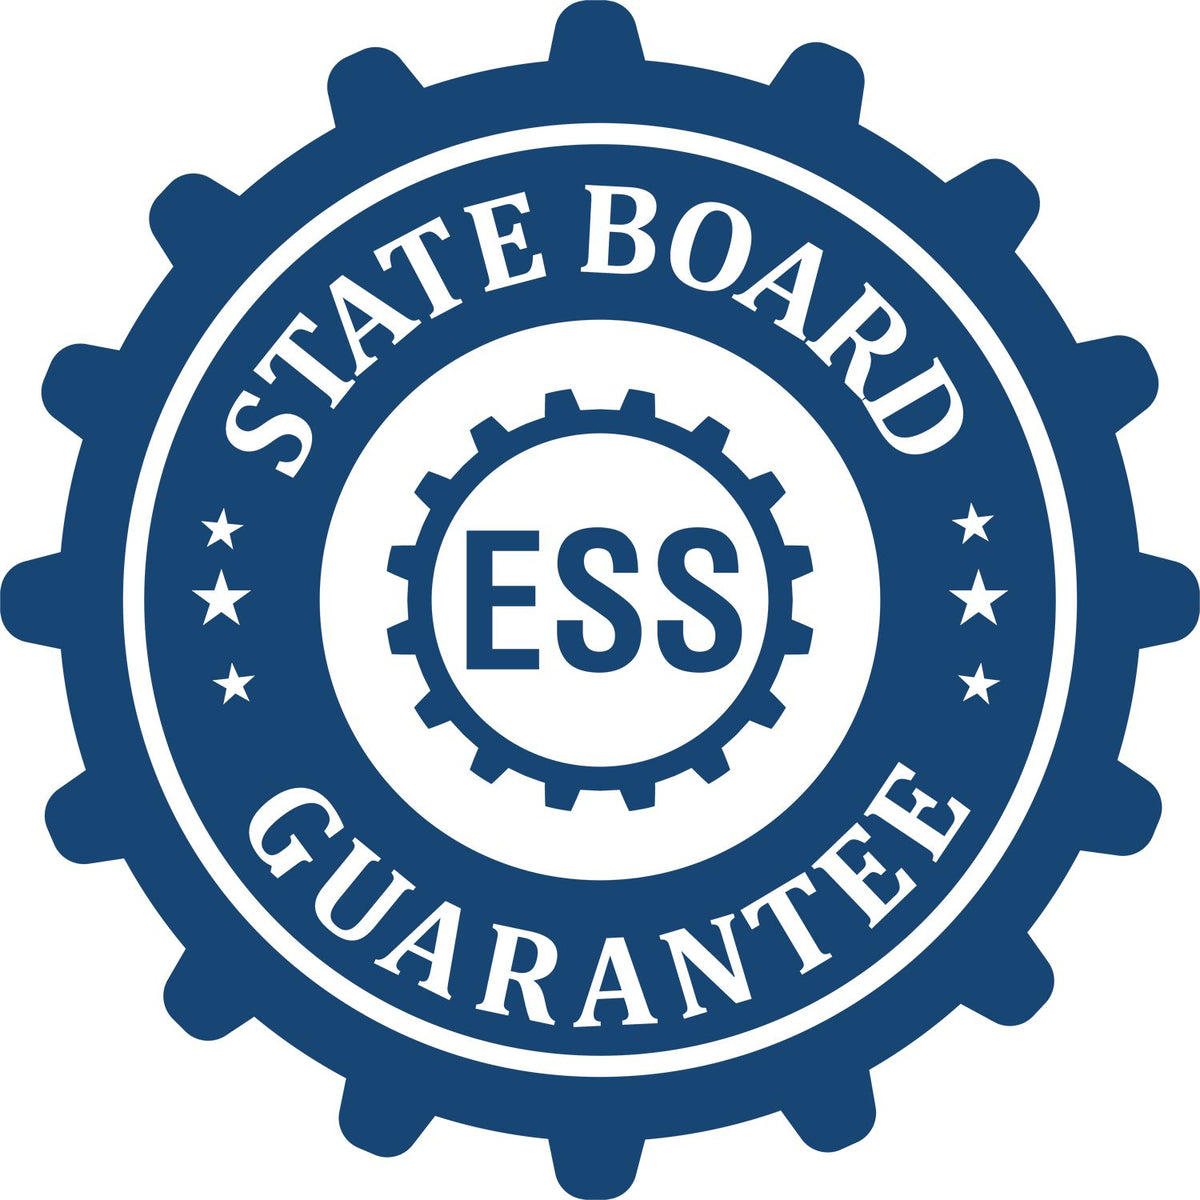 An emblem in a gear shape illustrating a state board guarantee for the Kansas Geologist Desk Seal